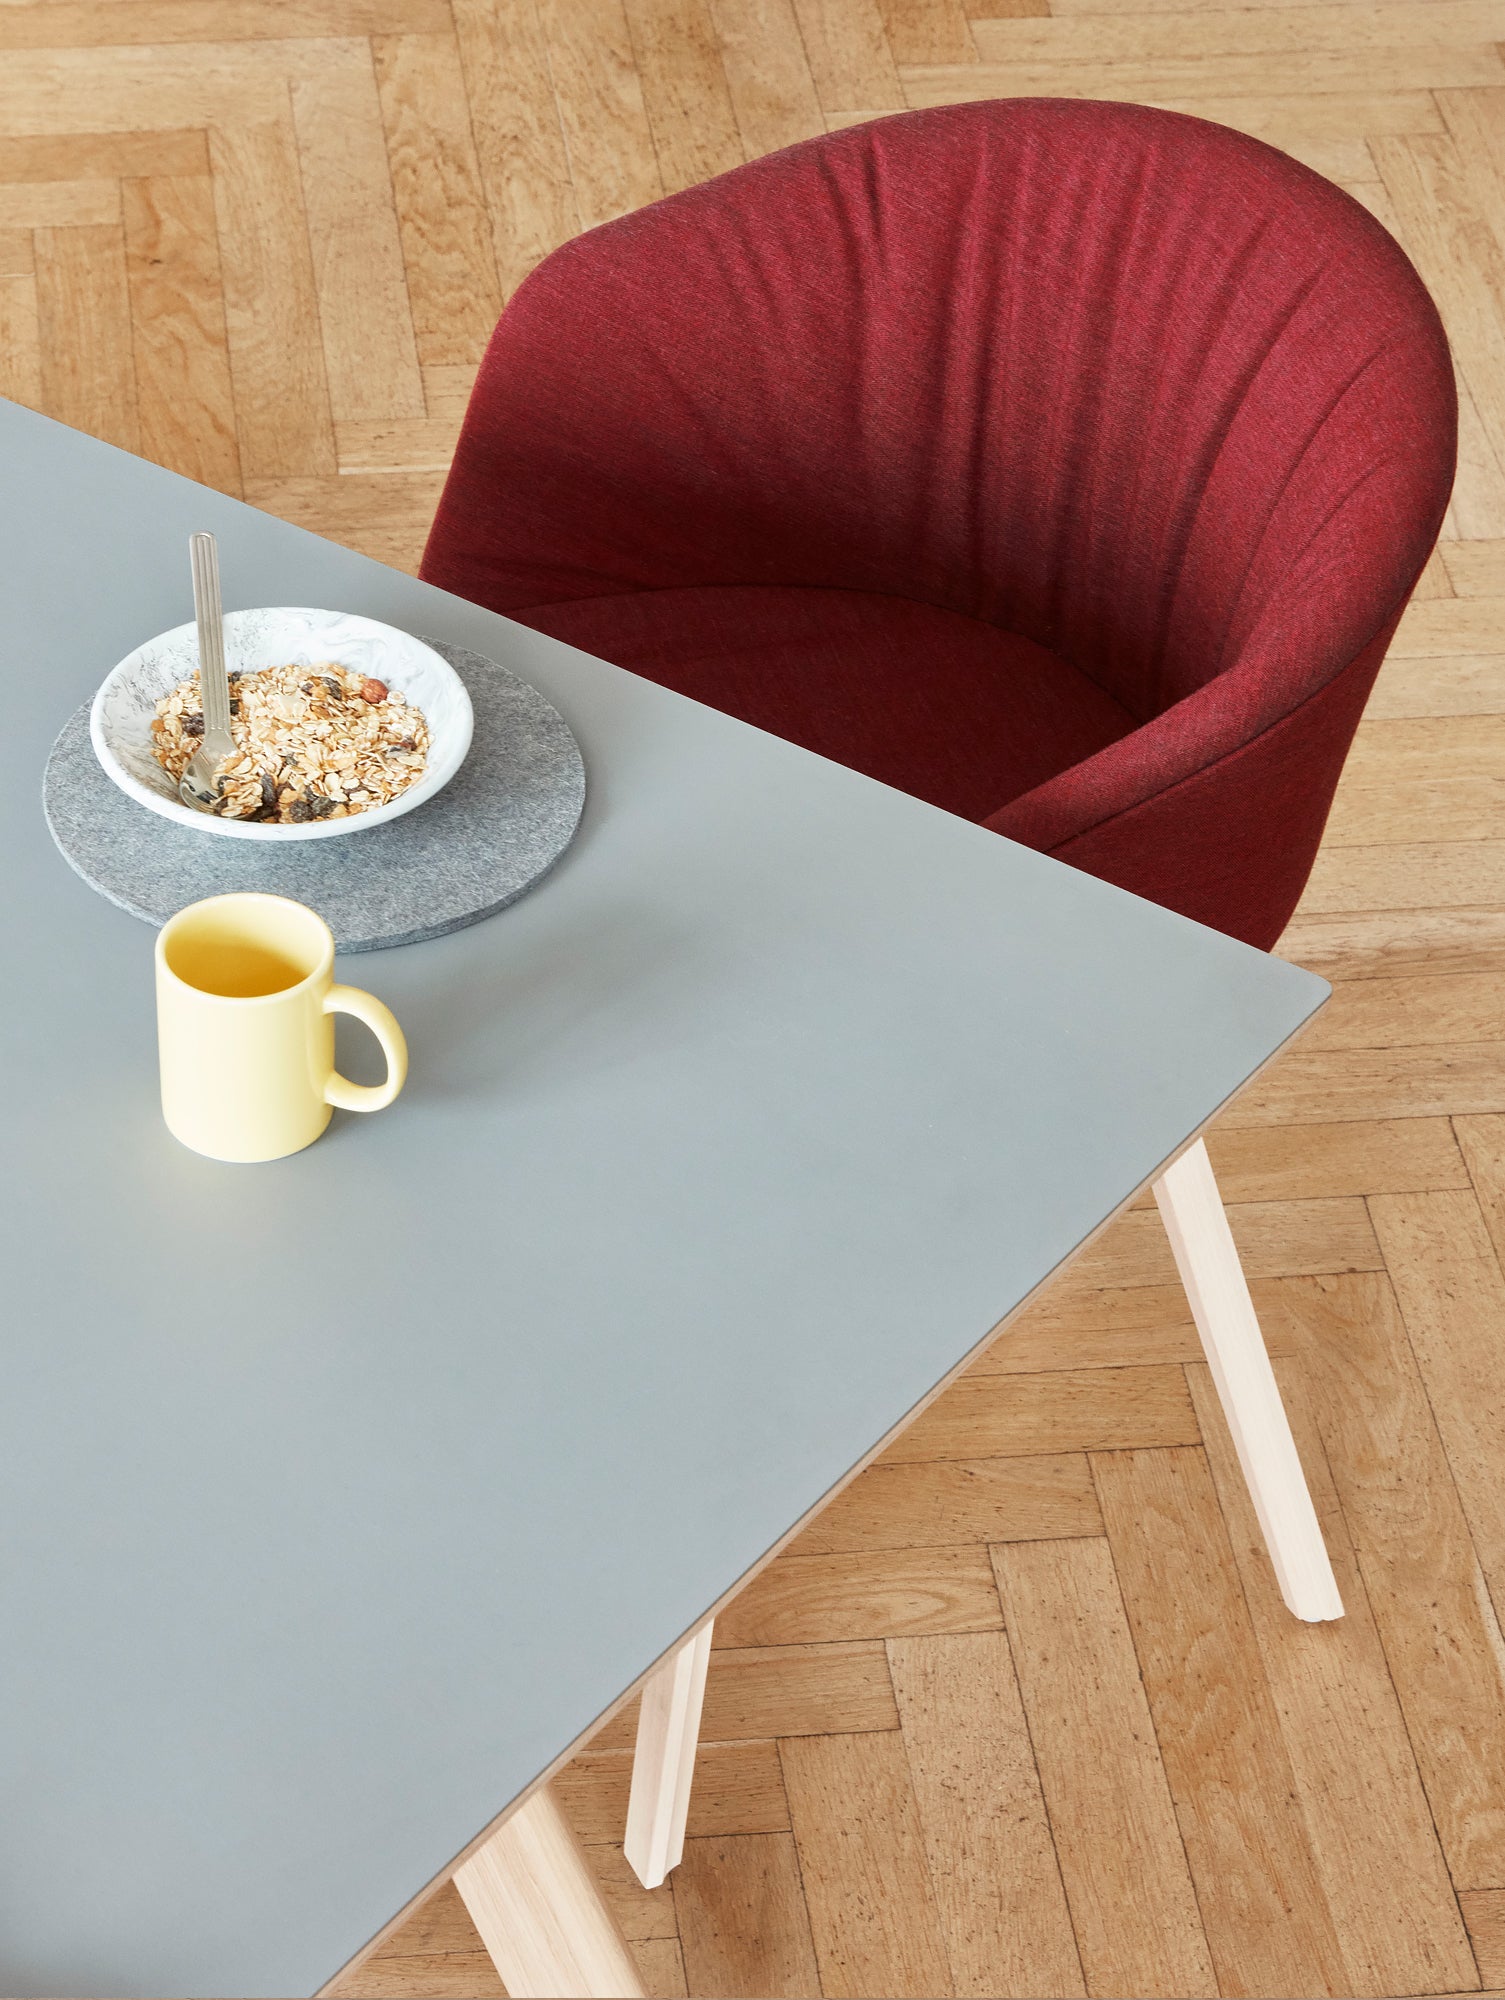 Copenhague Dining Table CPH30 by HAY / 90 x 250 cm / Grey Linoleum top / Oak base (water based lacquer)